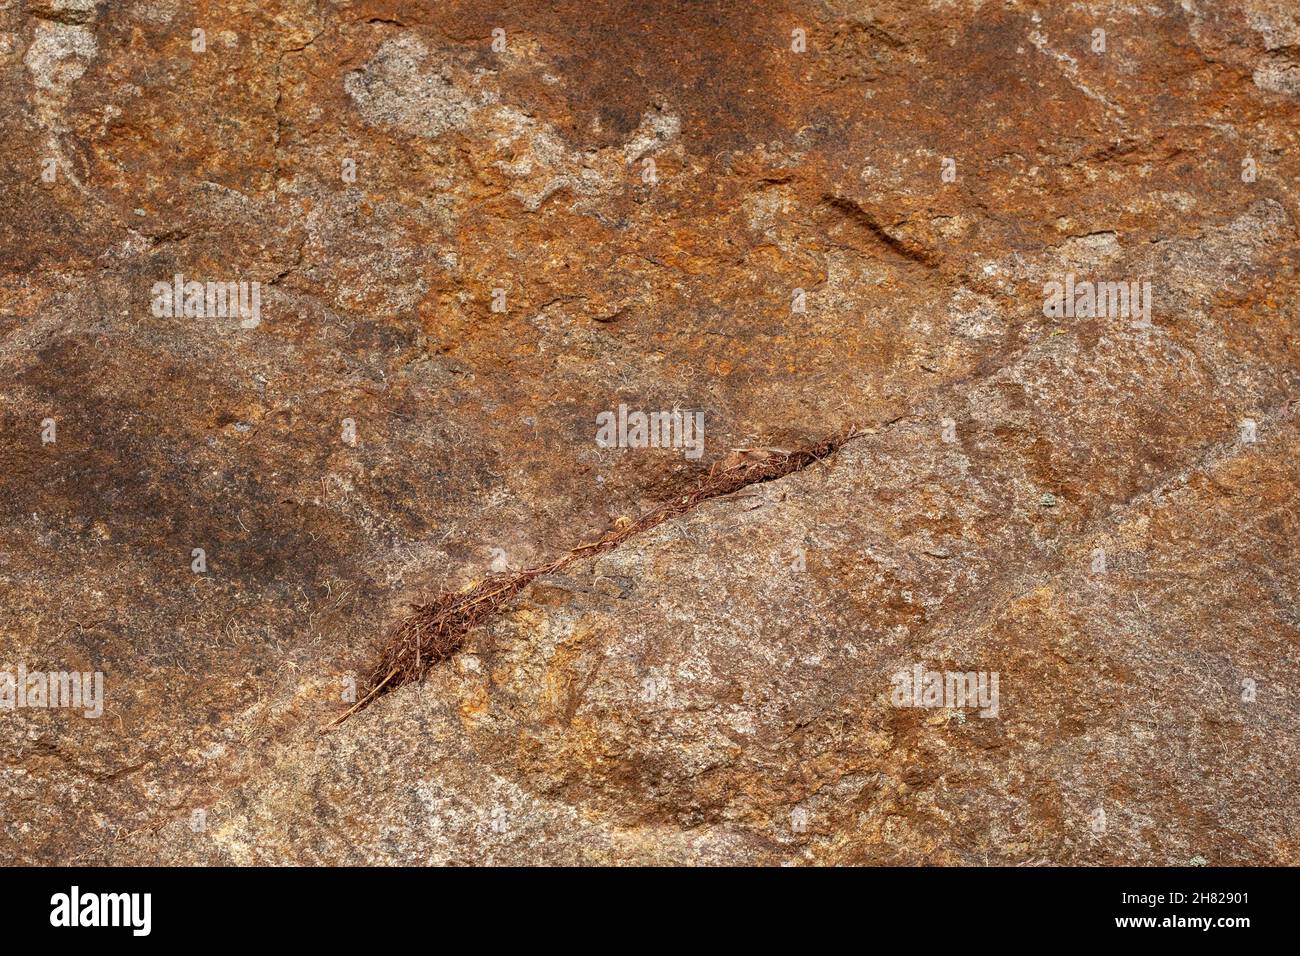 Light brown natural stone mediterranean climate background Stock Photo